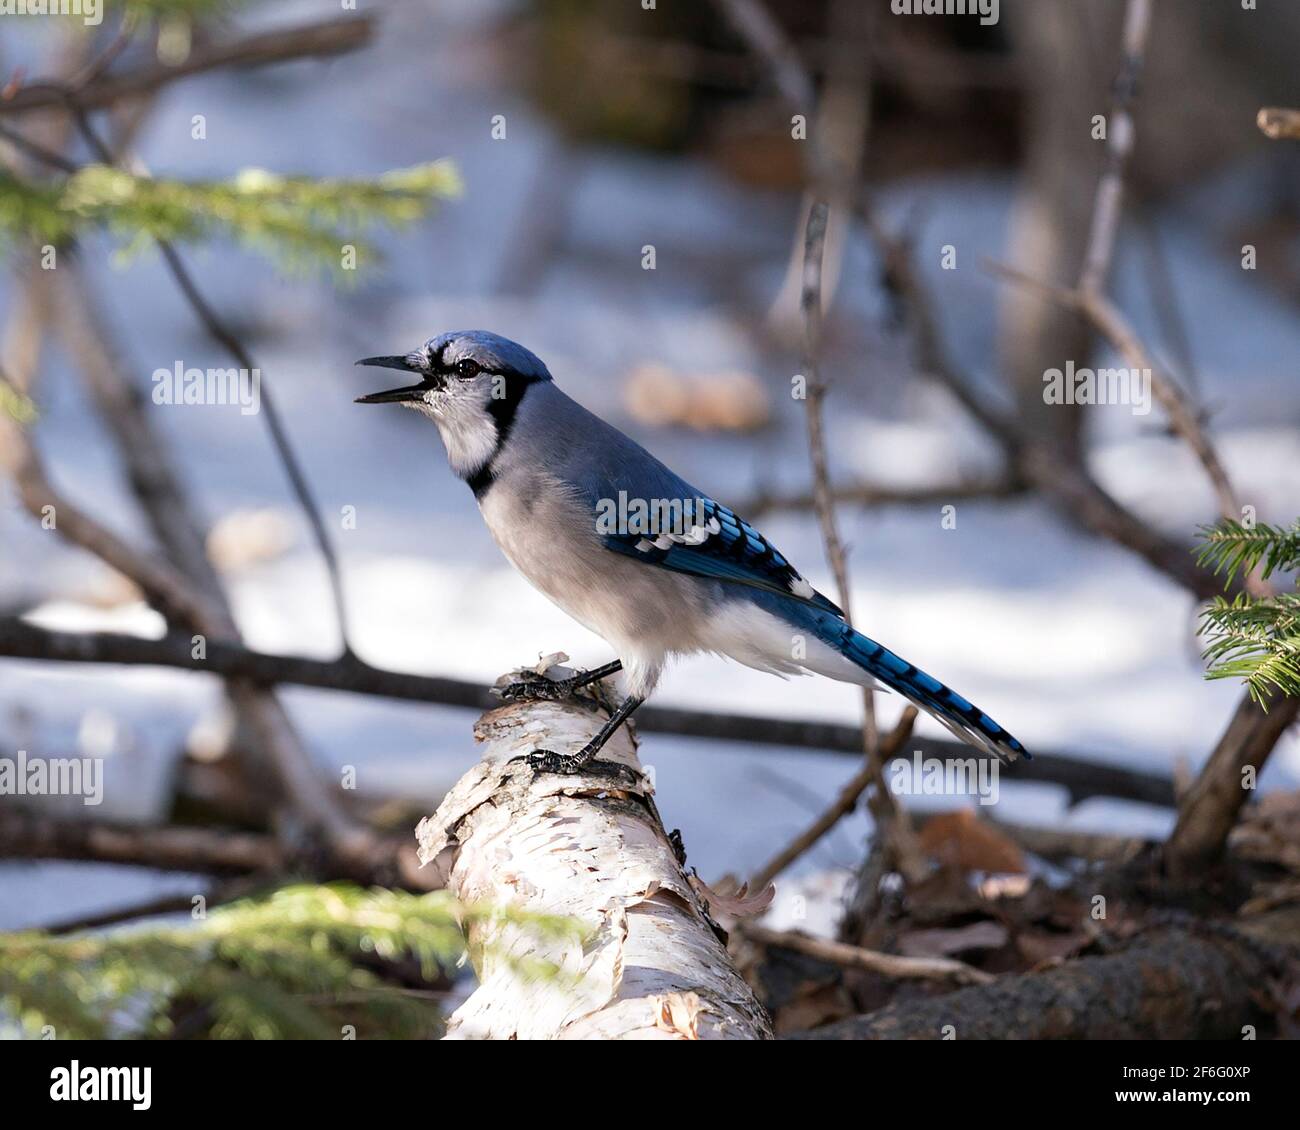 Blue Jay close-up profile side view with open beak and perched on a tree stump with a blur background in the forest environment and habitat. Image. Stock Photo